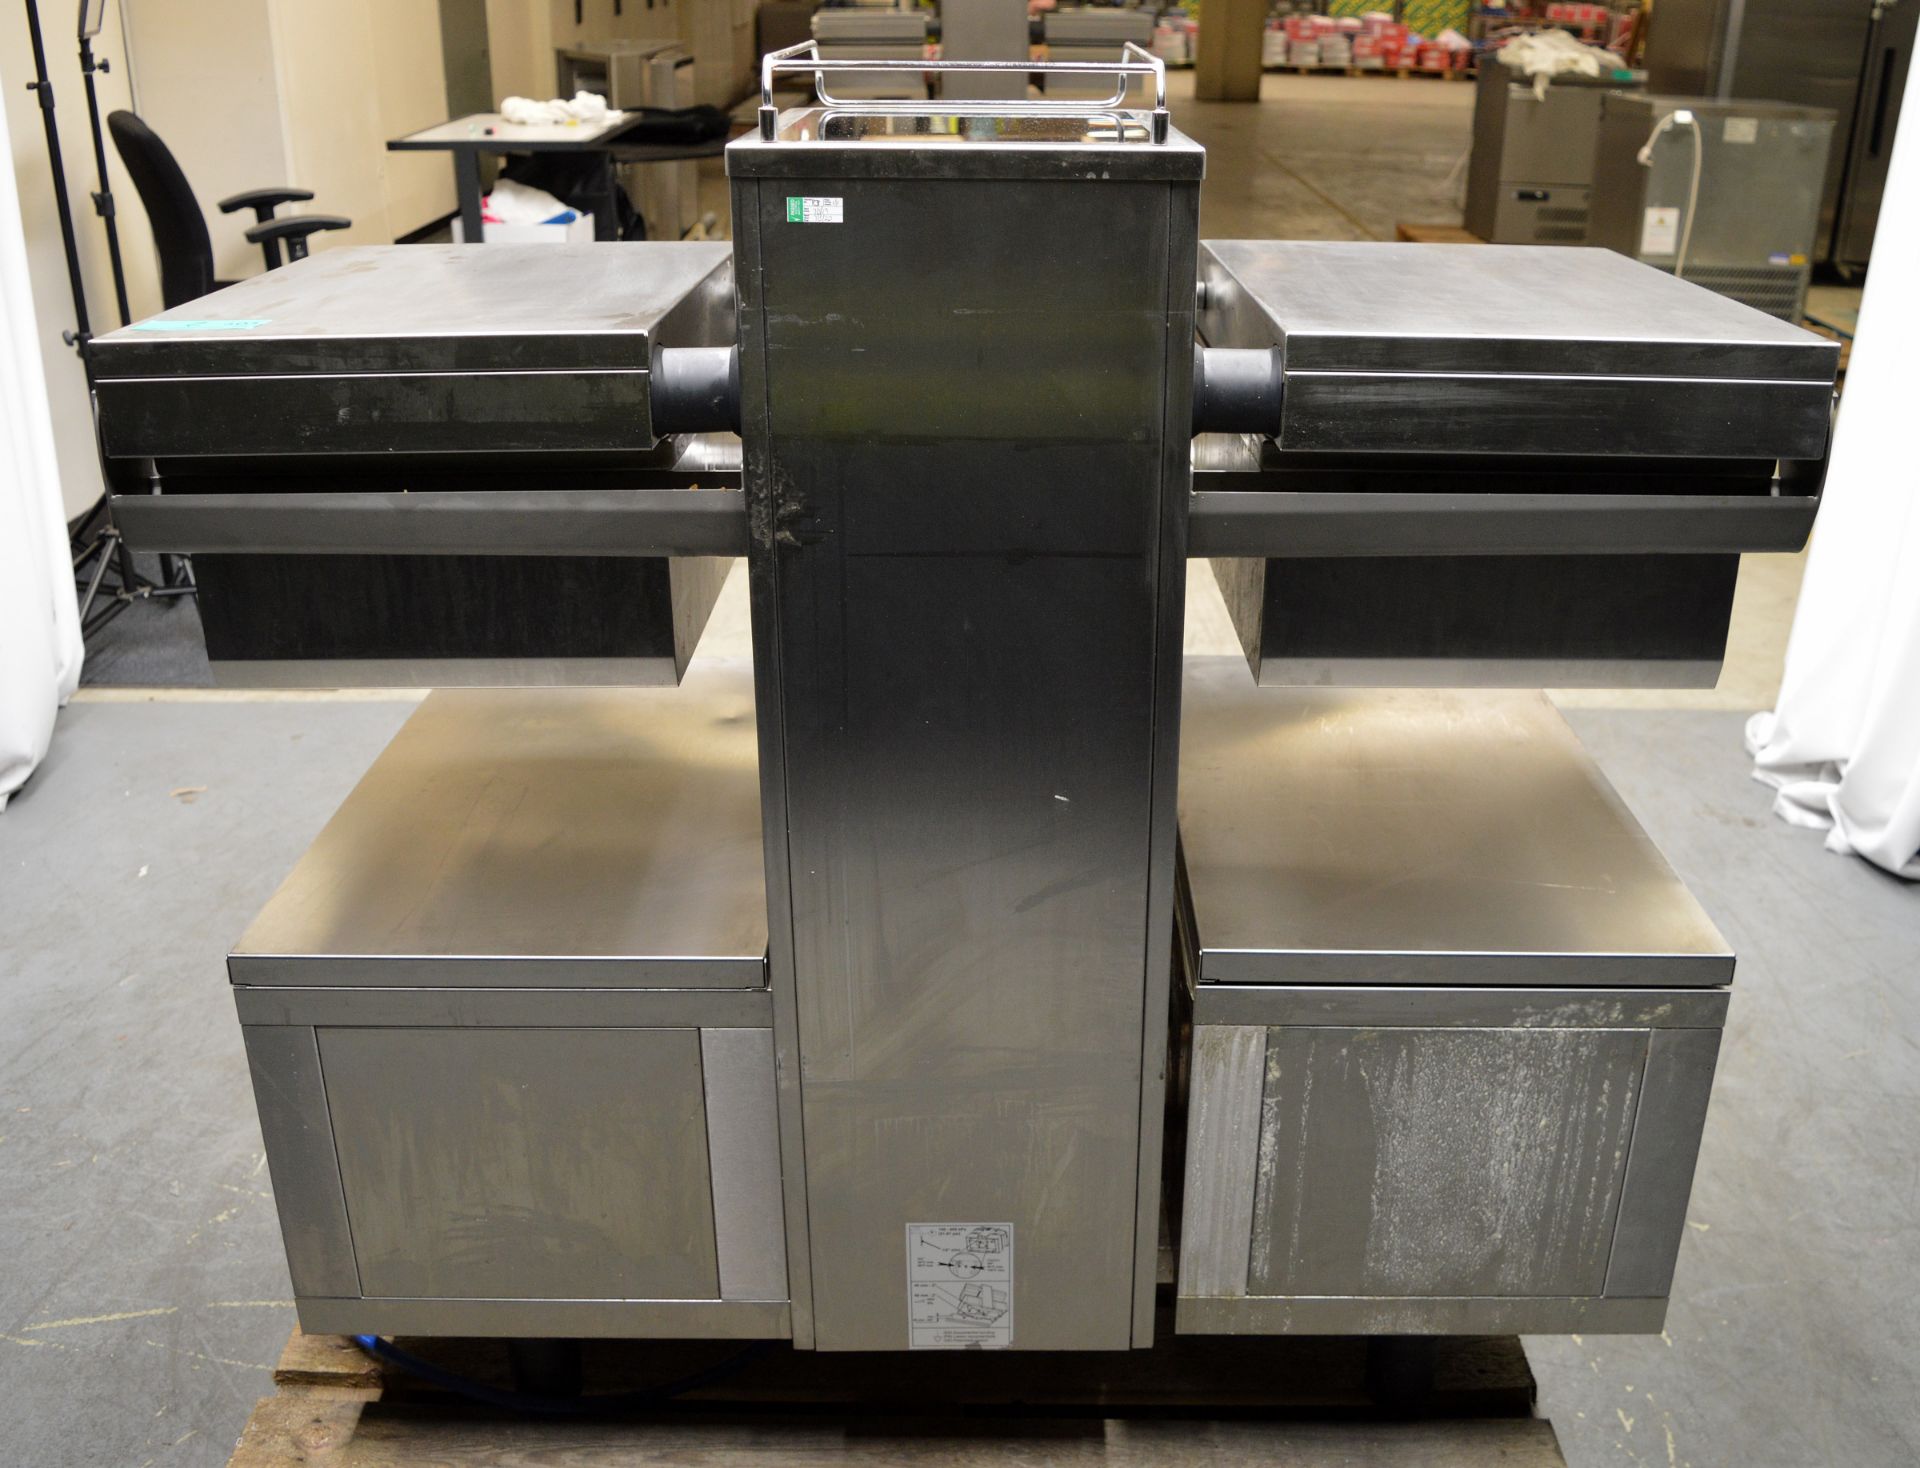 Rational VarioCookingCenter VCC112+, ex demo model, 3 phase electric - Image 9 of 11